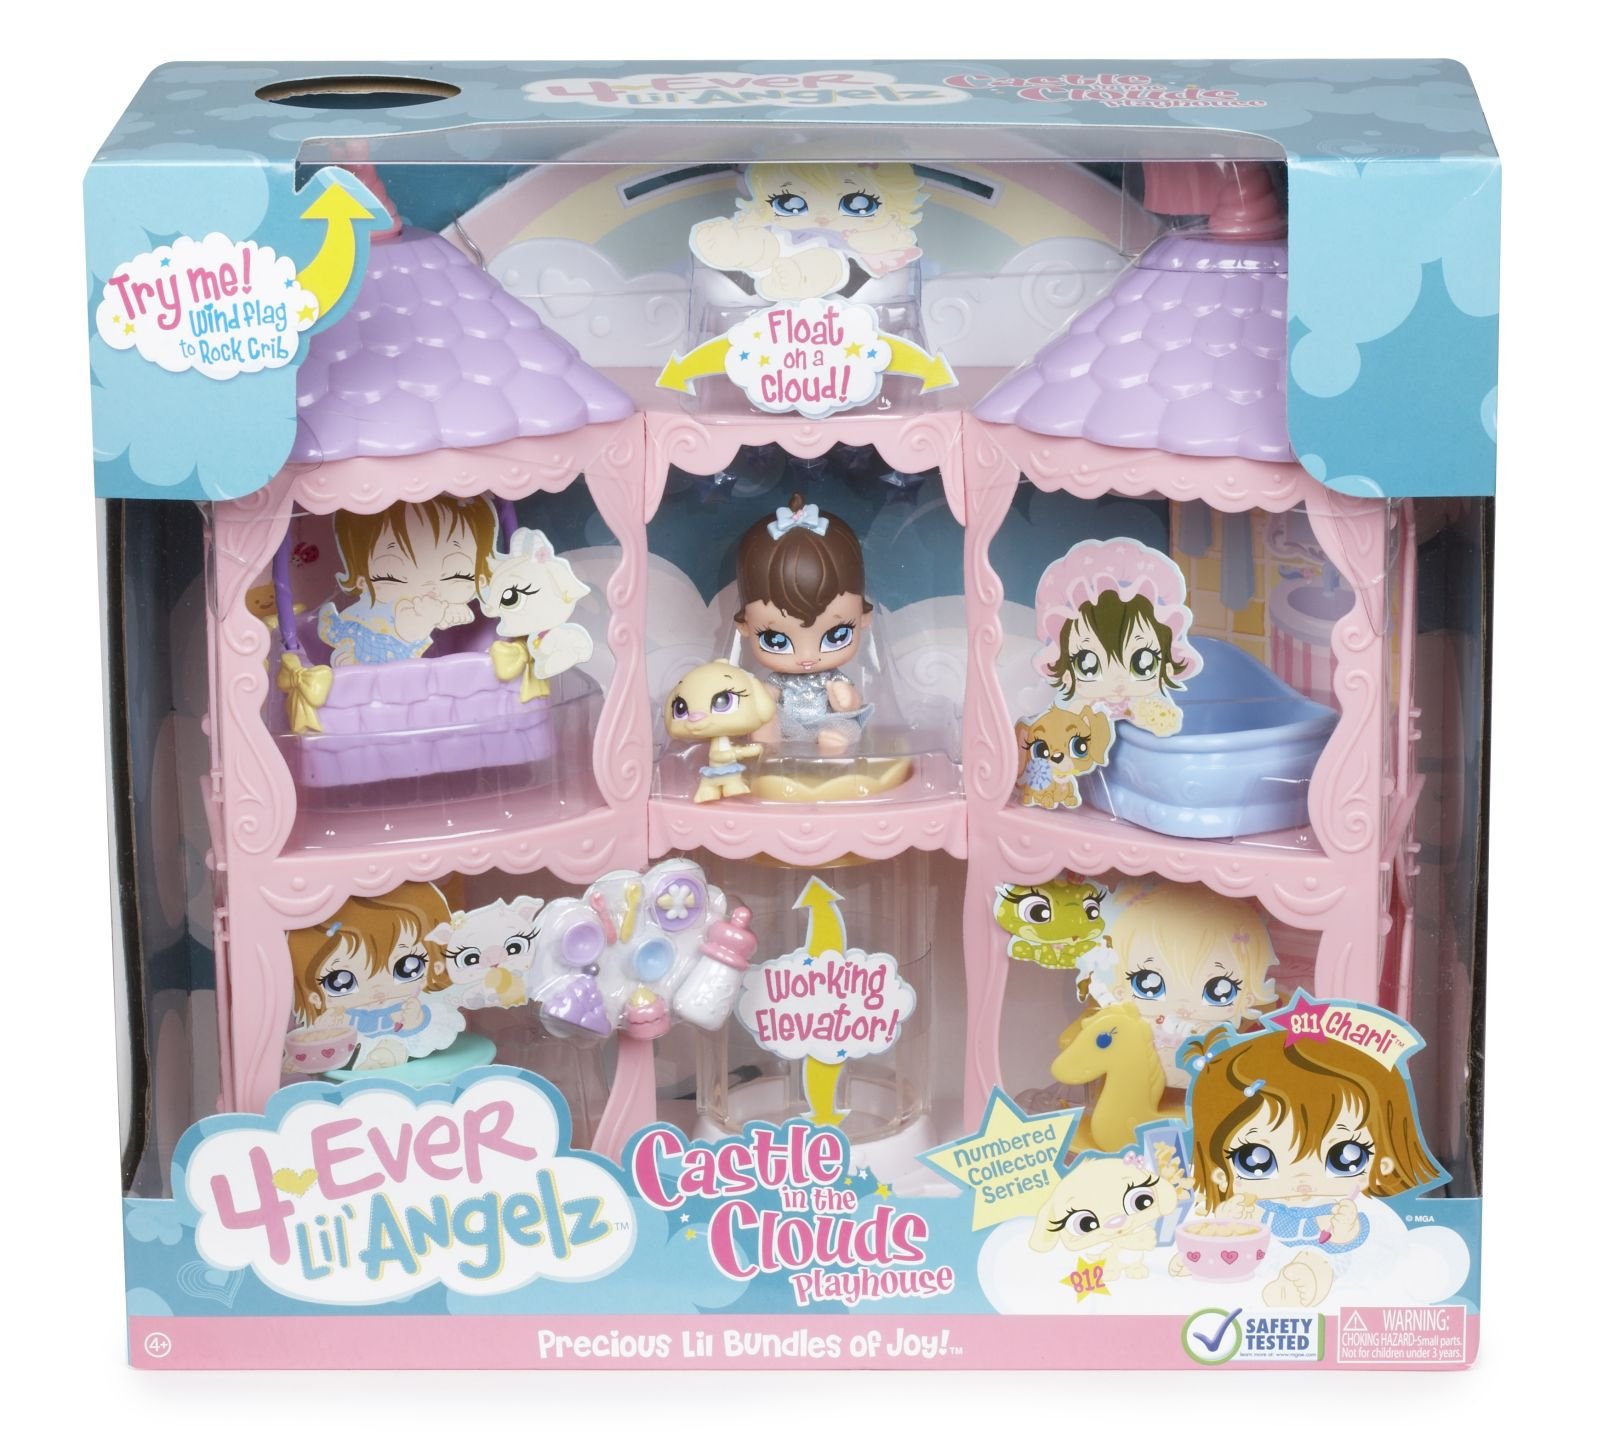 Lil Angelz 4Ever Castle in The Clouds Playset